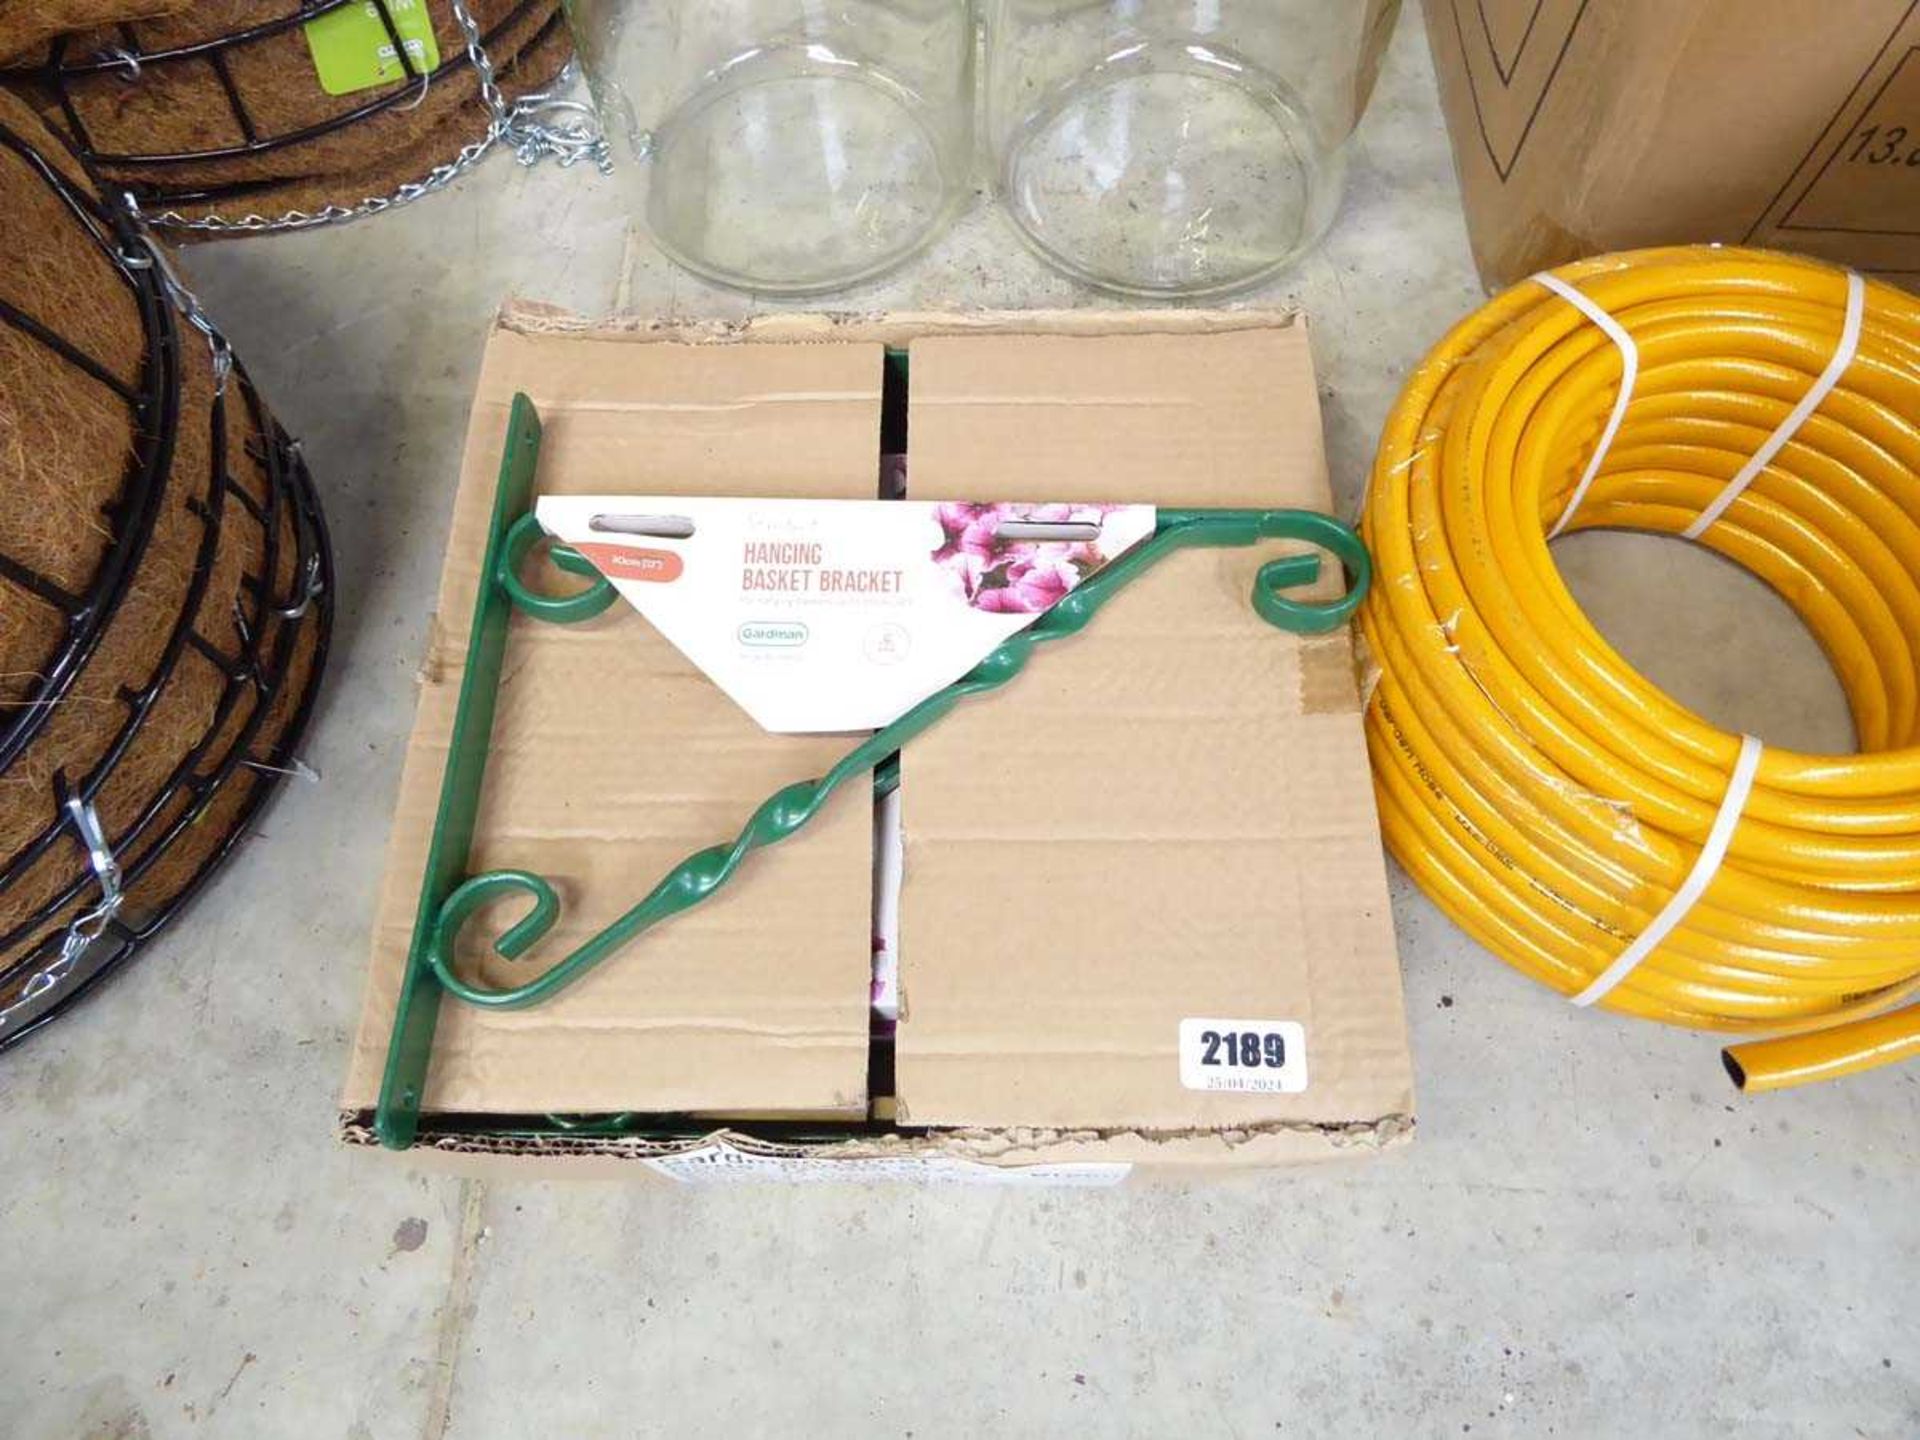 Box containing 10 x 12in. green hanging basket brackets